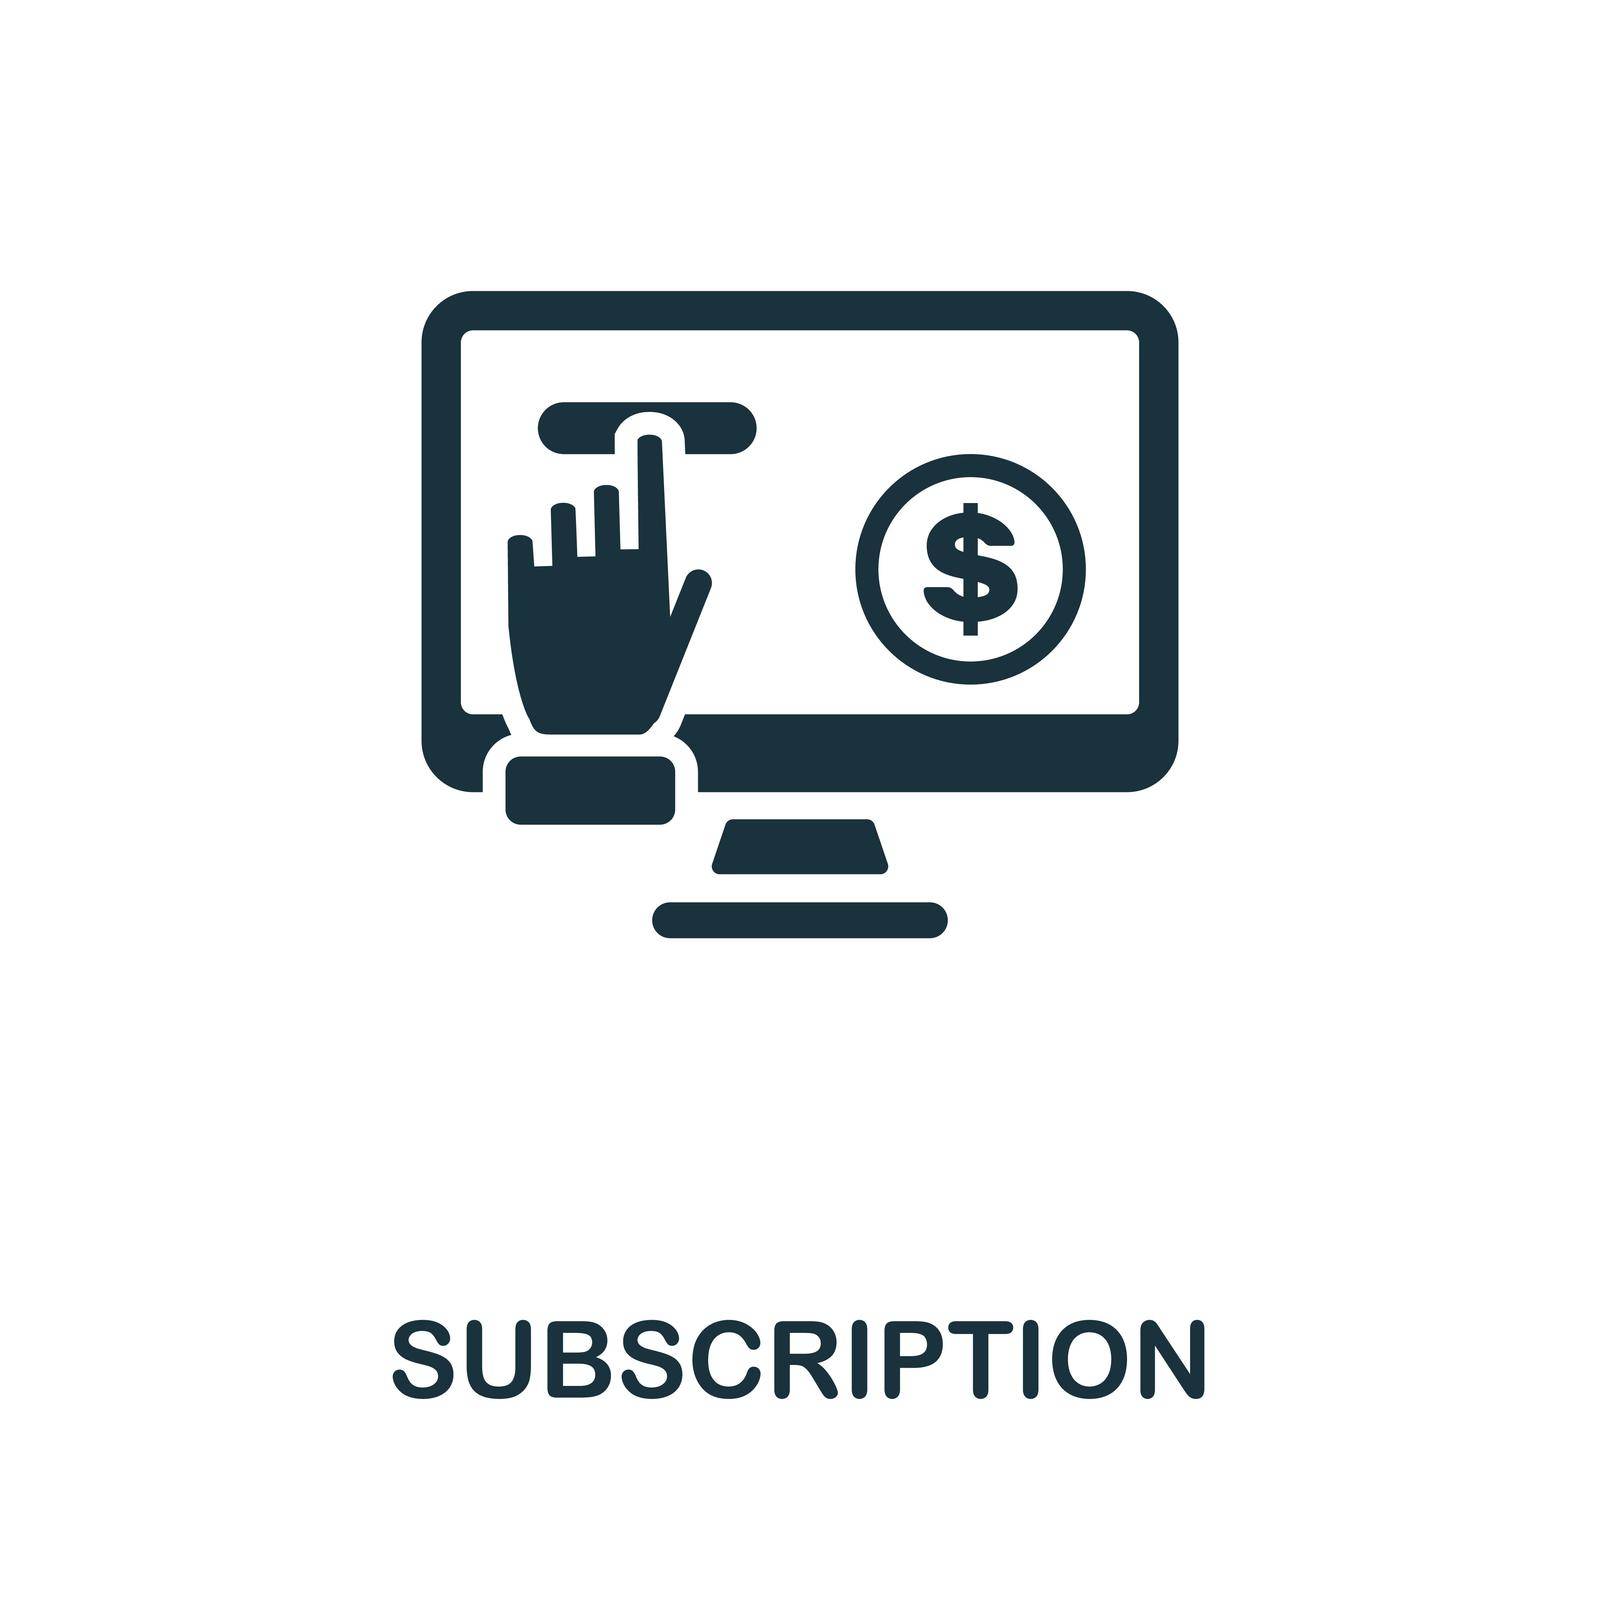 Subscription icon. Black sign from social media marketing collection. Creative Subscription icon for web design, templates and infographics.